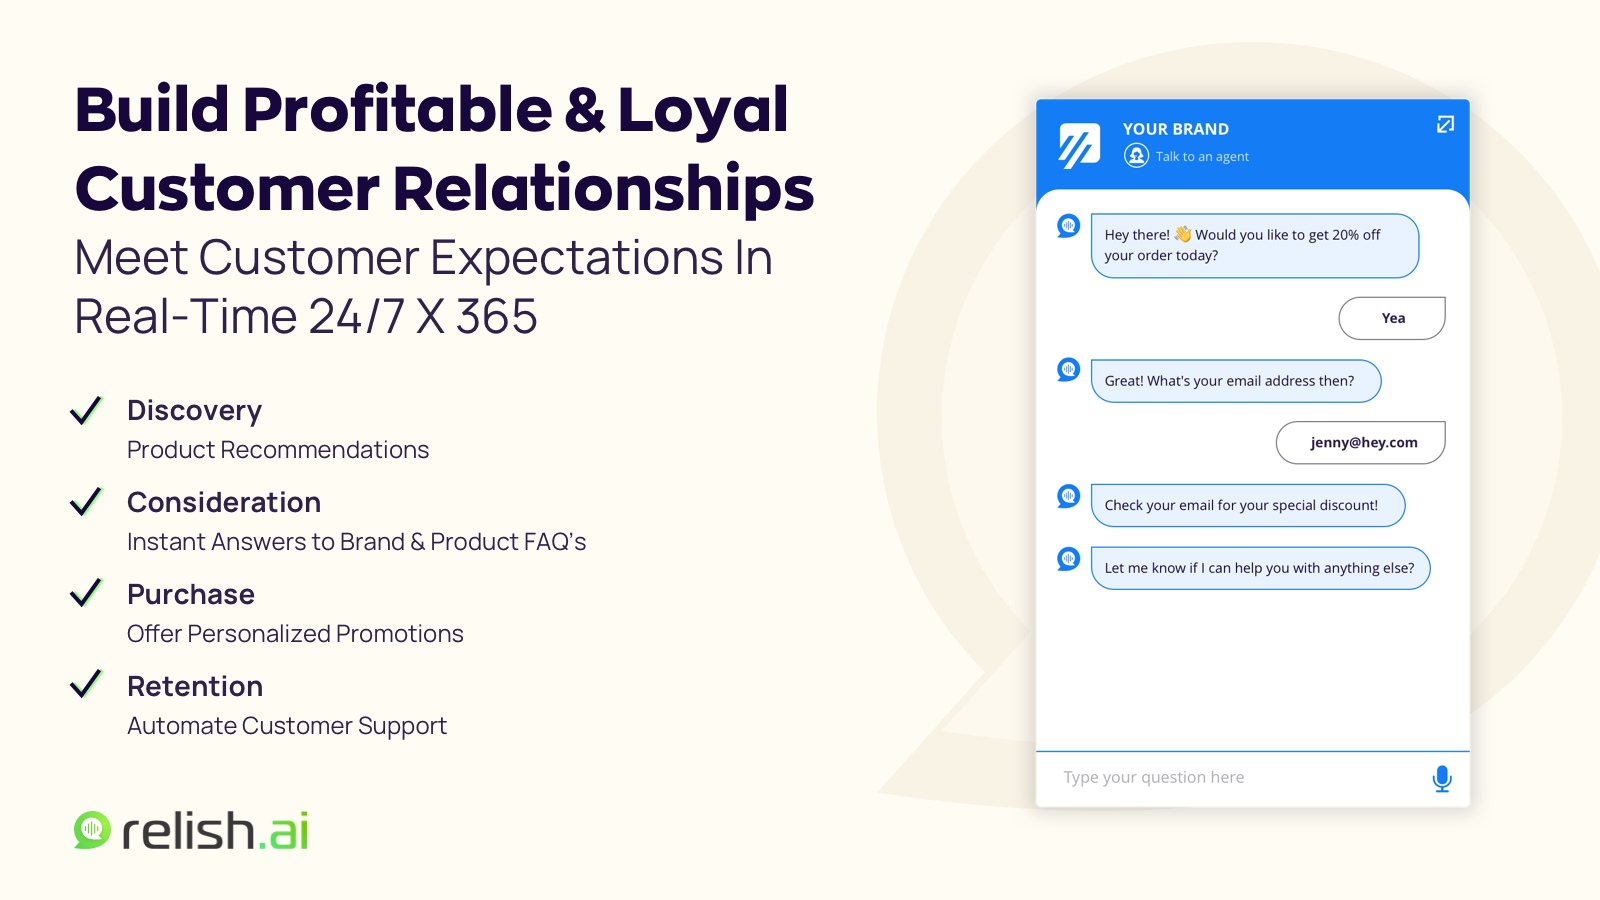 Help Your Customers Find Exactly What They Want - Help shoppers discover products they might like through our AI-powered chatbots, interactive quizzes, and personalized recommendations. Instantly give them the answers they are looking for.